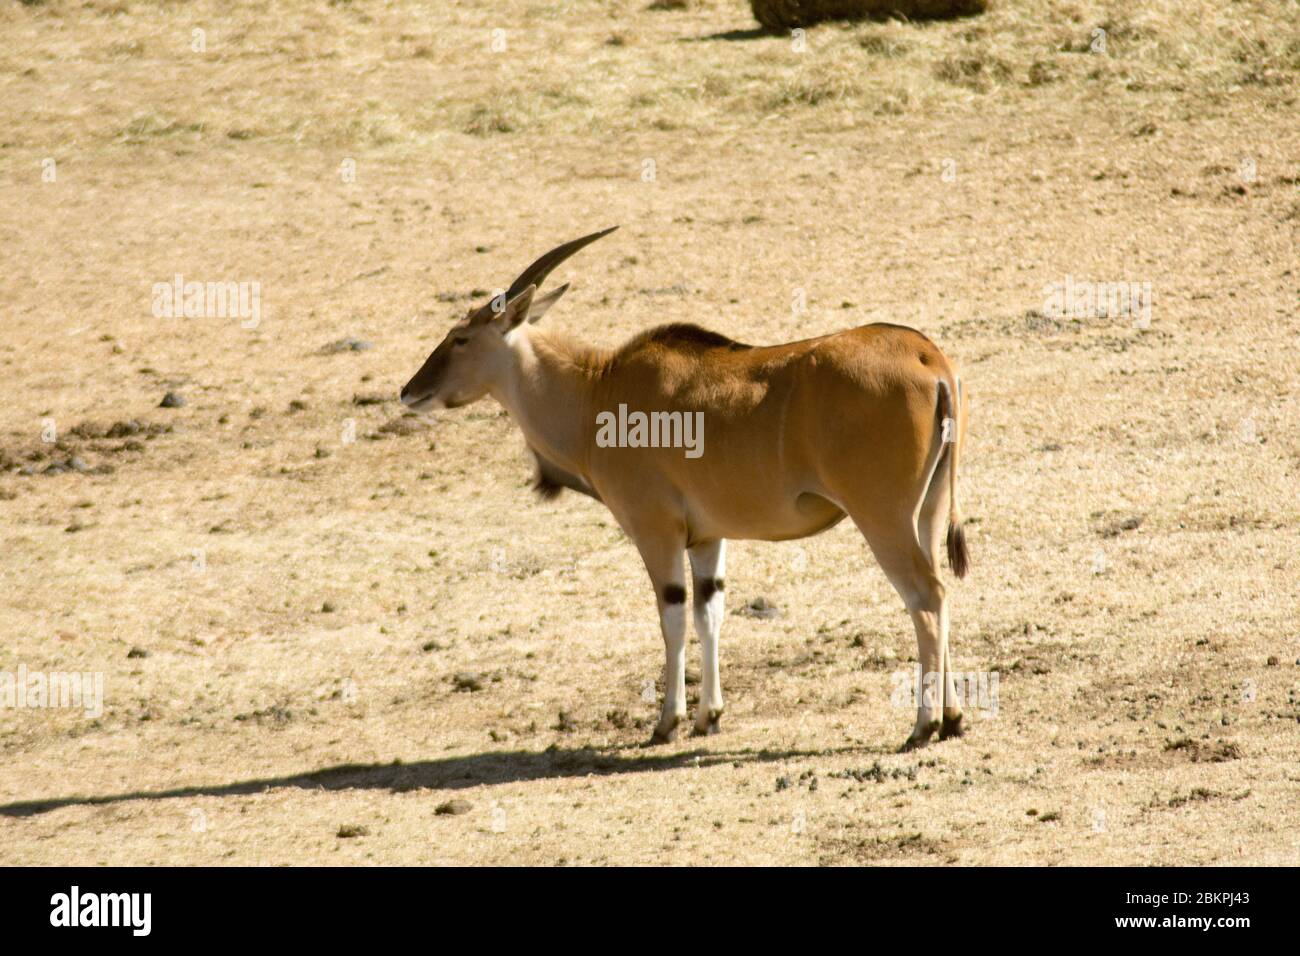 A wild Common Eland (or Antelope) in a South African game reserve or safari park Stock Photo